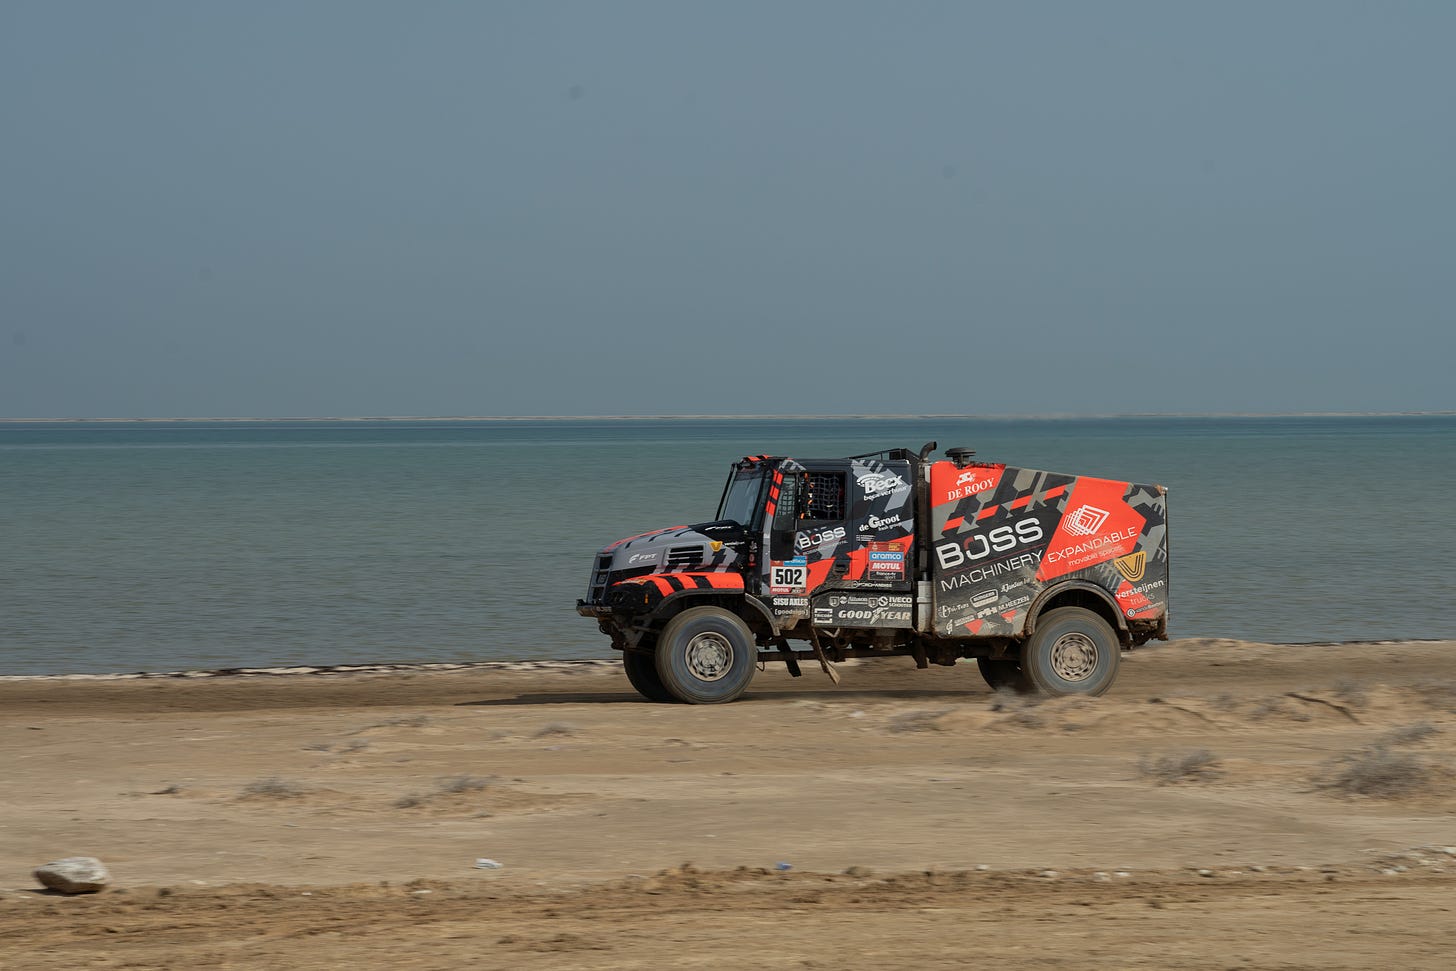 A 20,000-pound diesel truck racing across a beach strewn with plastic bottles.